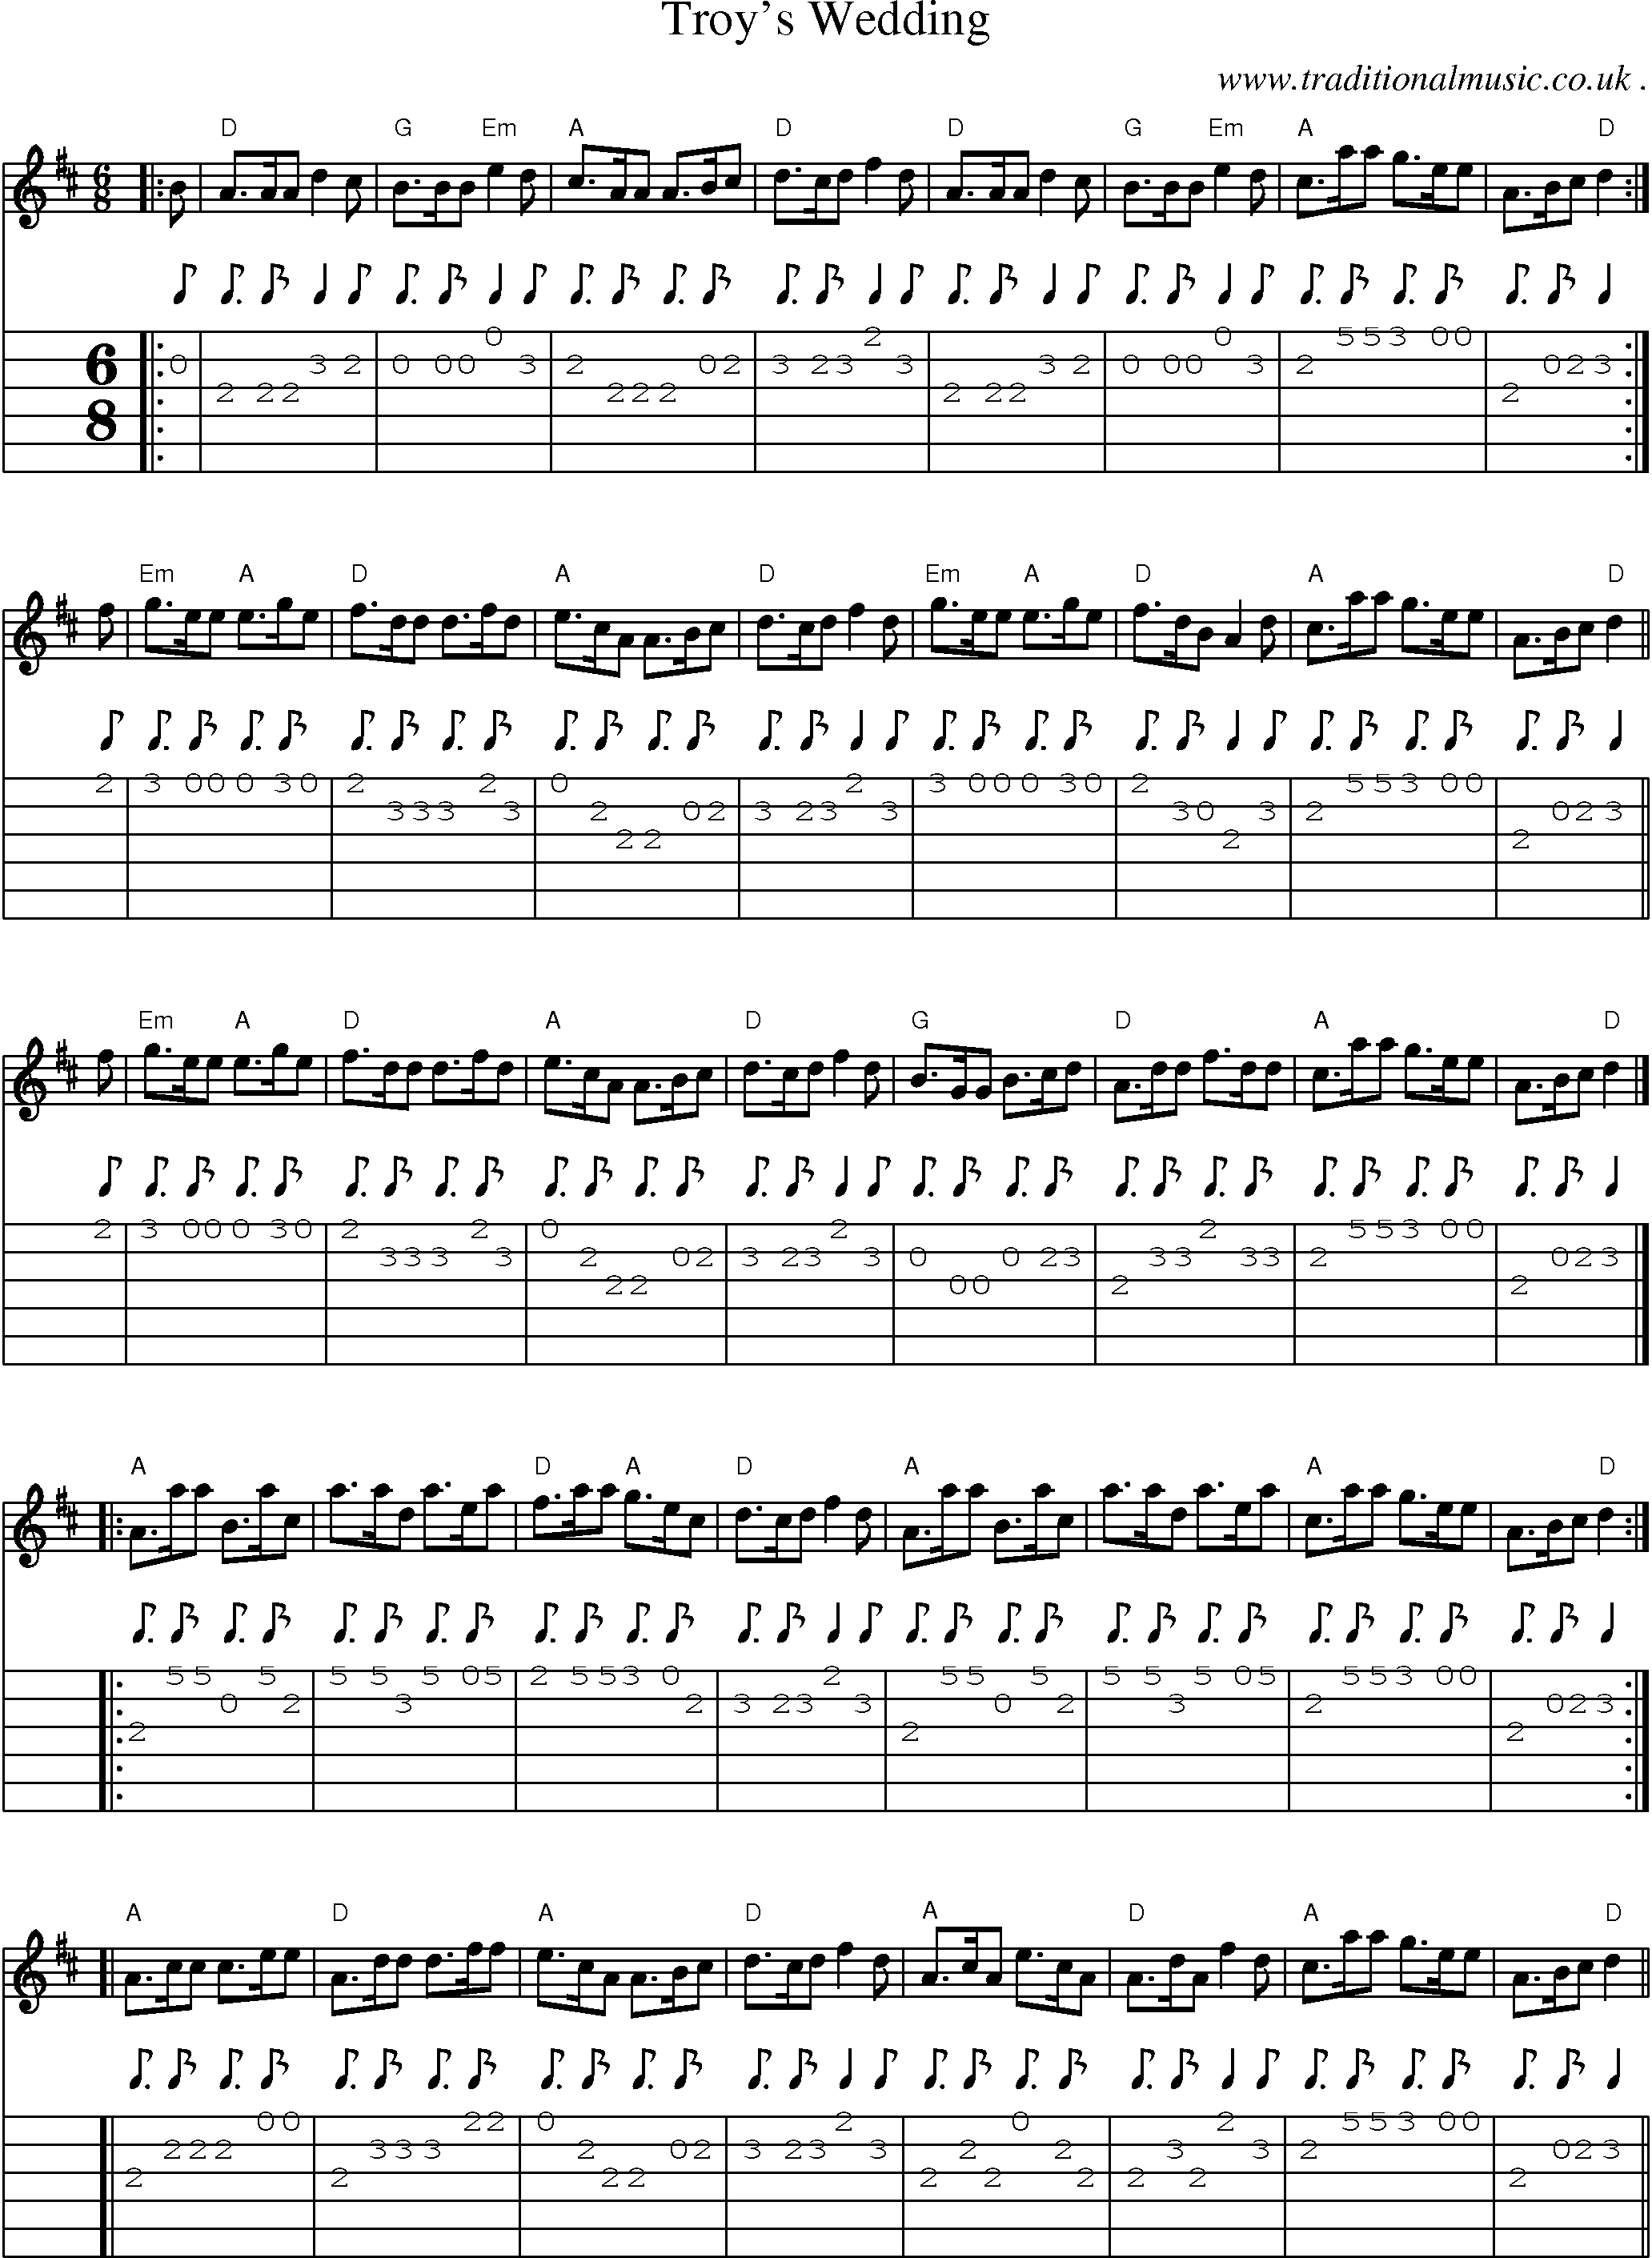 Sheet-music  score, Chords and Guitar Tabs for Troys Wedding